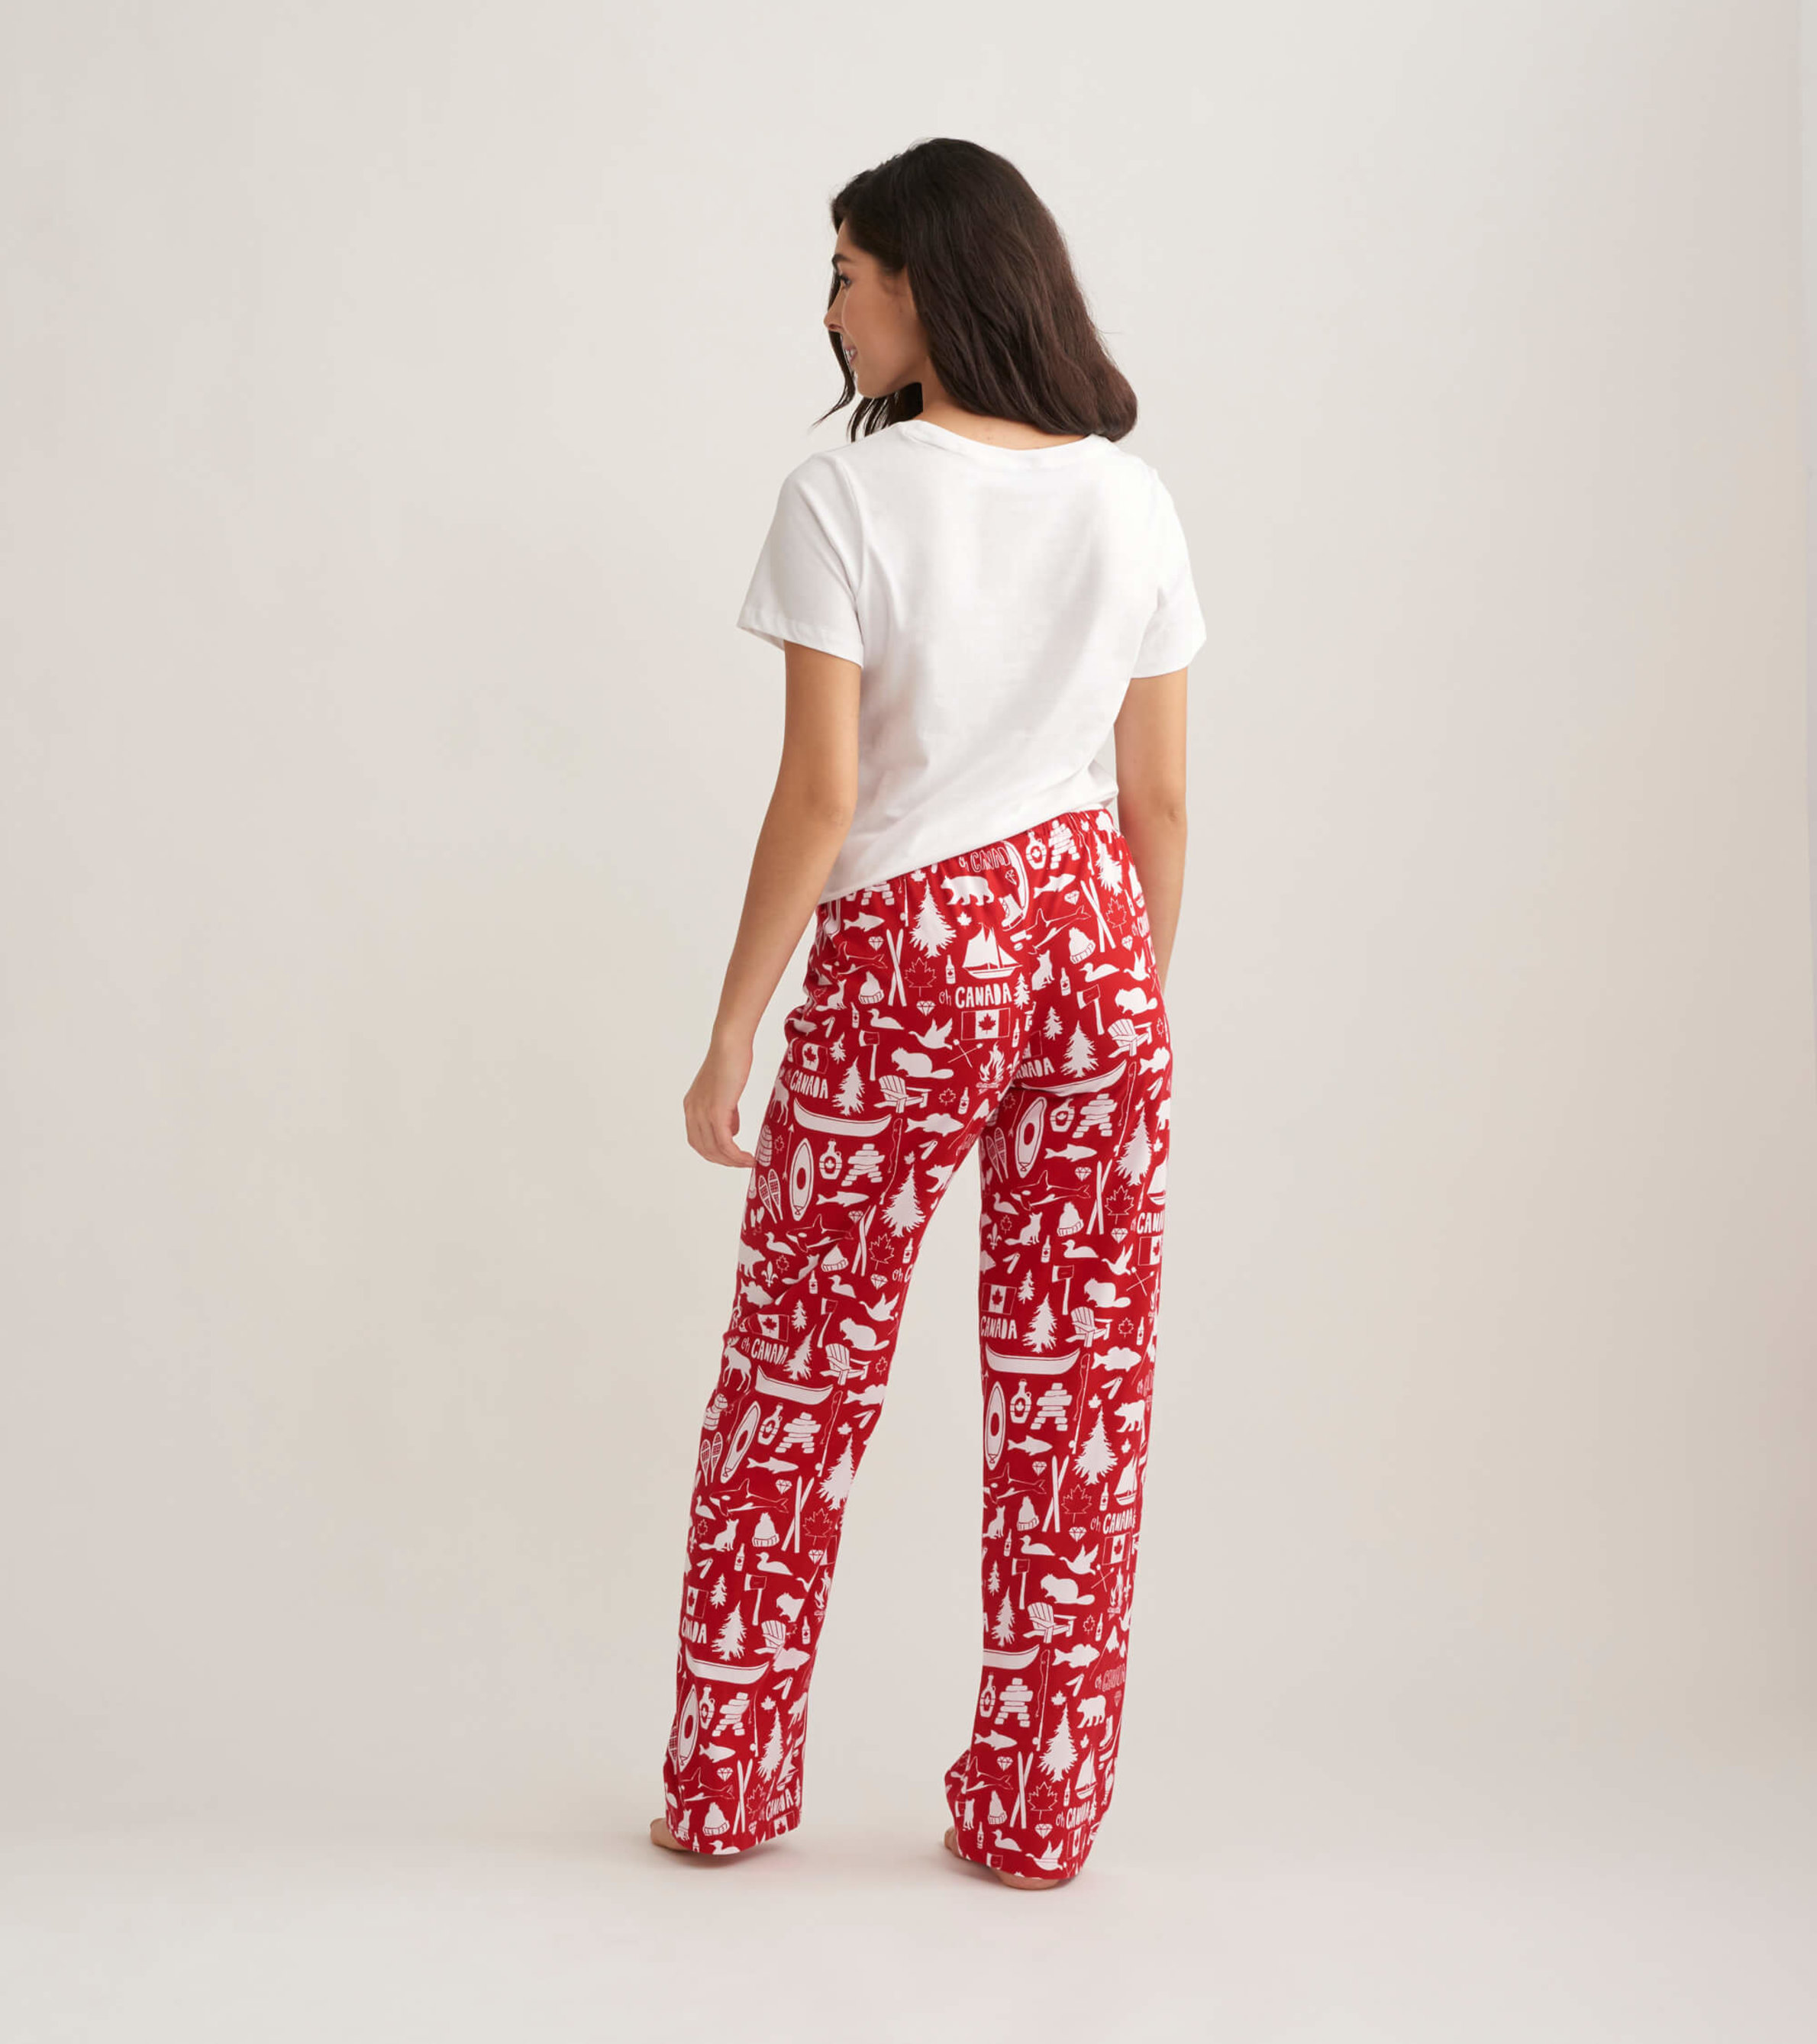 Lounge Pants  Buy Lounge Pants Online in India